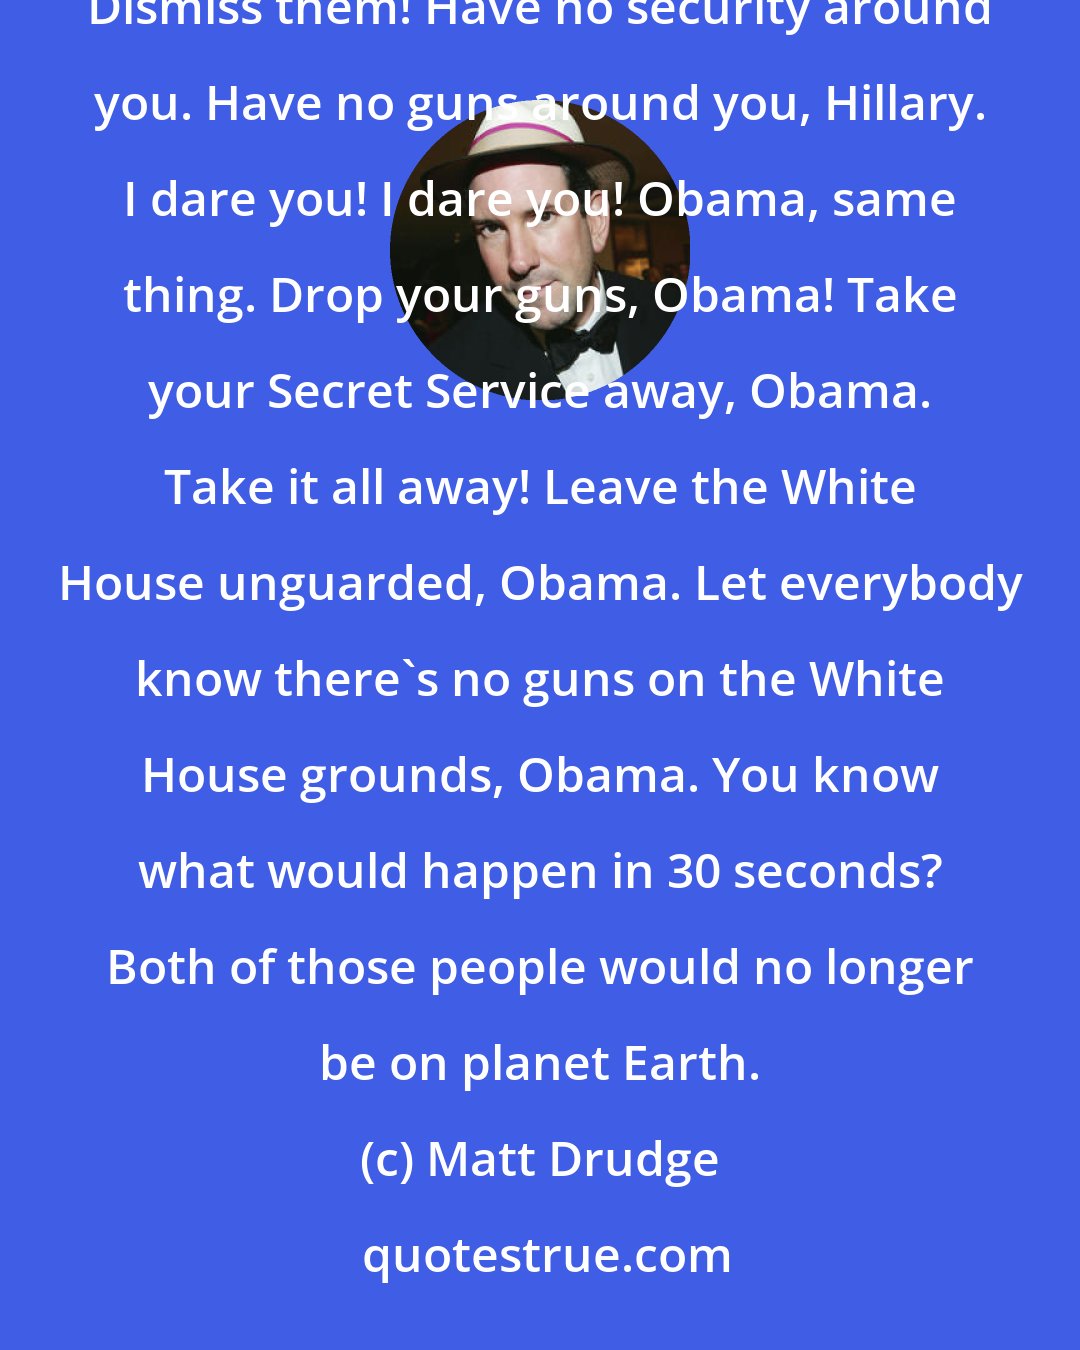 Matt Drudge: I challenge Hillary Clinton; take away your Secret Service. Take it away now! Take away your Secret Service! Dismiss them! Have no security around you. Have no guns around you, Hillary. I dare you! I dare you! Obama, same thing. Drop your guns, Obama! Take your Secret Service away, Obama. Take it all away! Leave the White House unguarded, Obama. Let everybody know there's no guns on the White House grounds, Obama. You know what would happen in 30 seconds? Both of those people would no longer be on planet Earth.